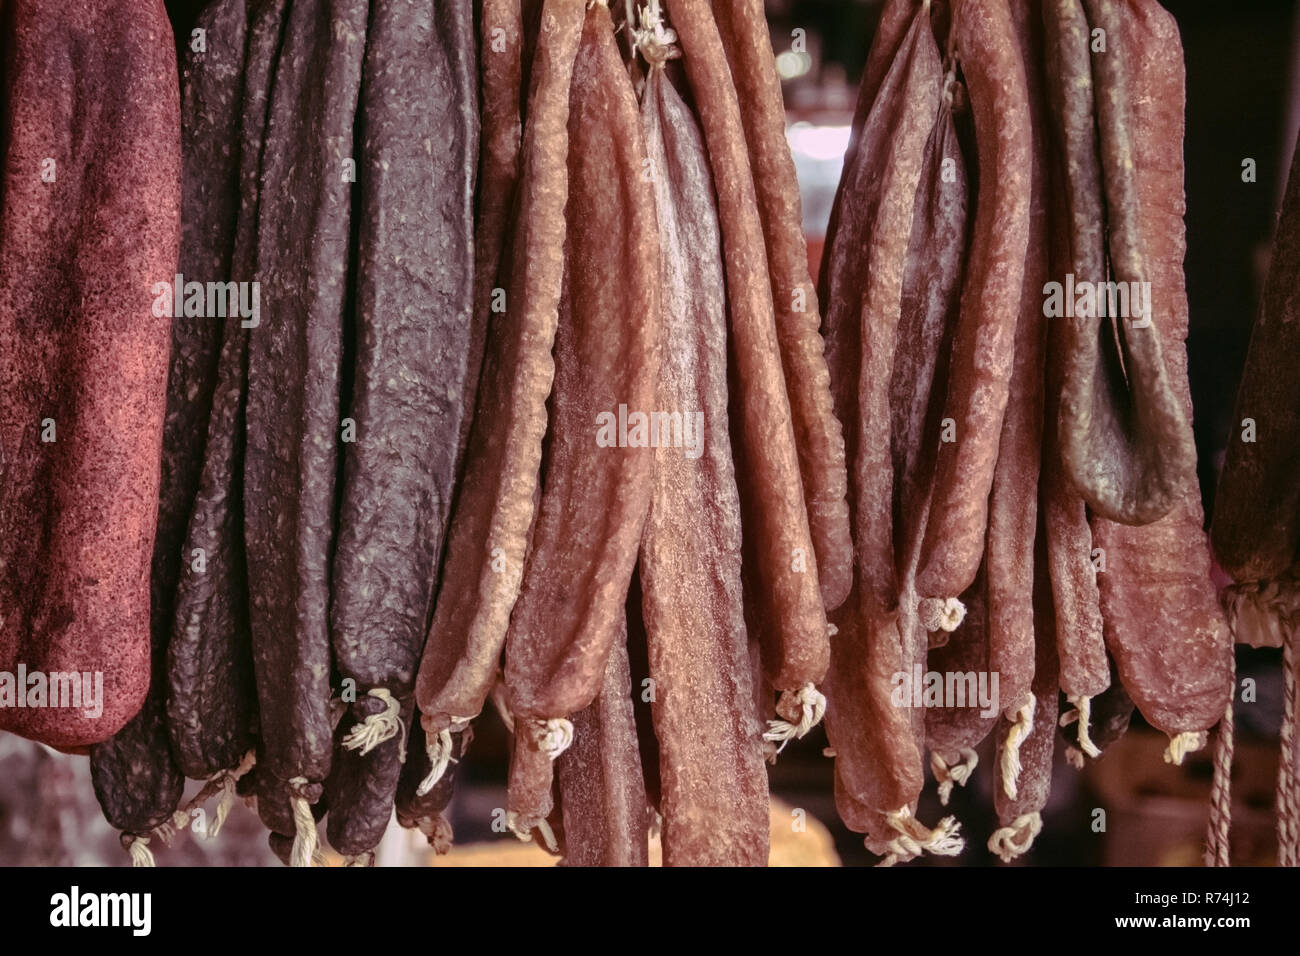 Sujuk and beef jerky hangs on a counter in the street market in the evening Stock Photo